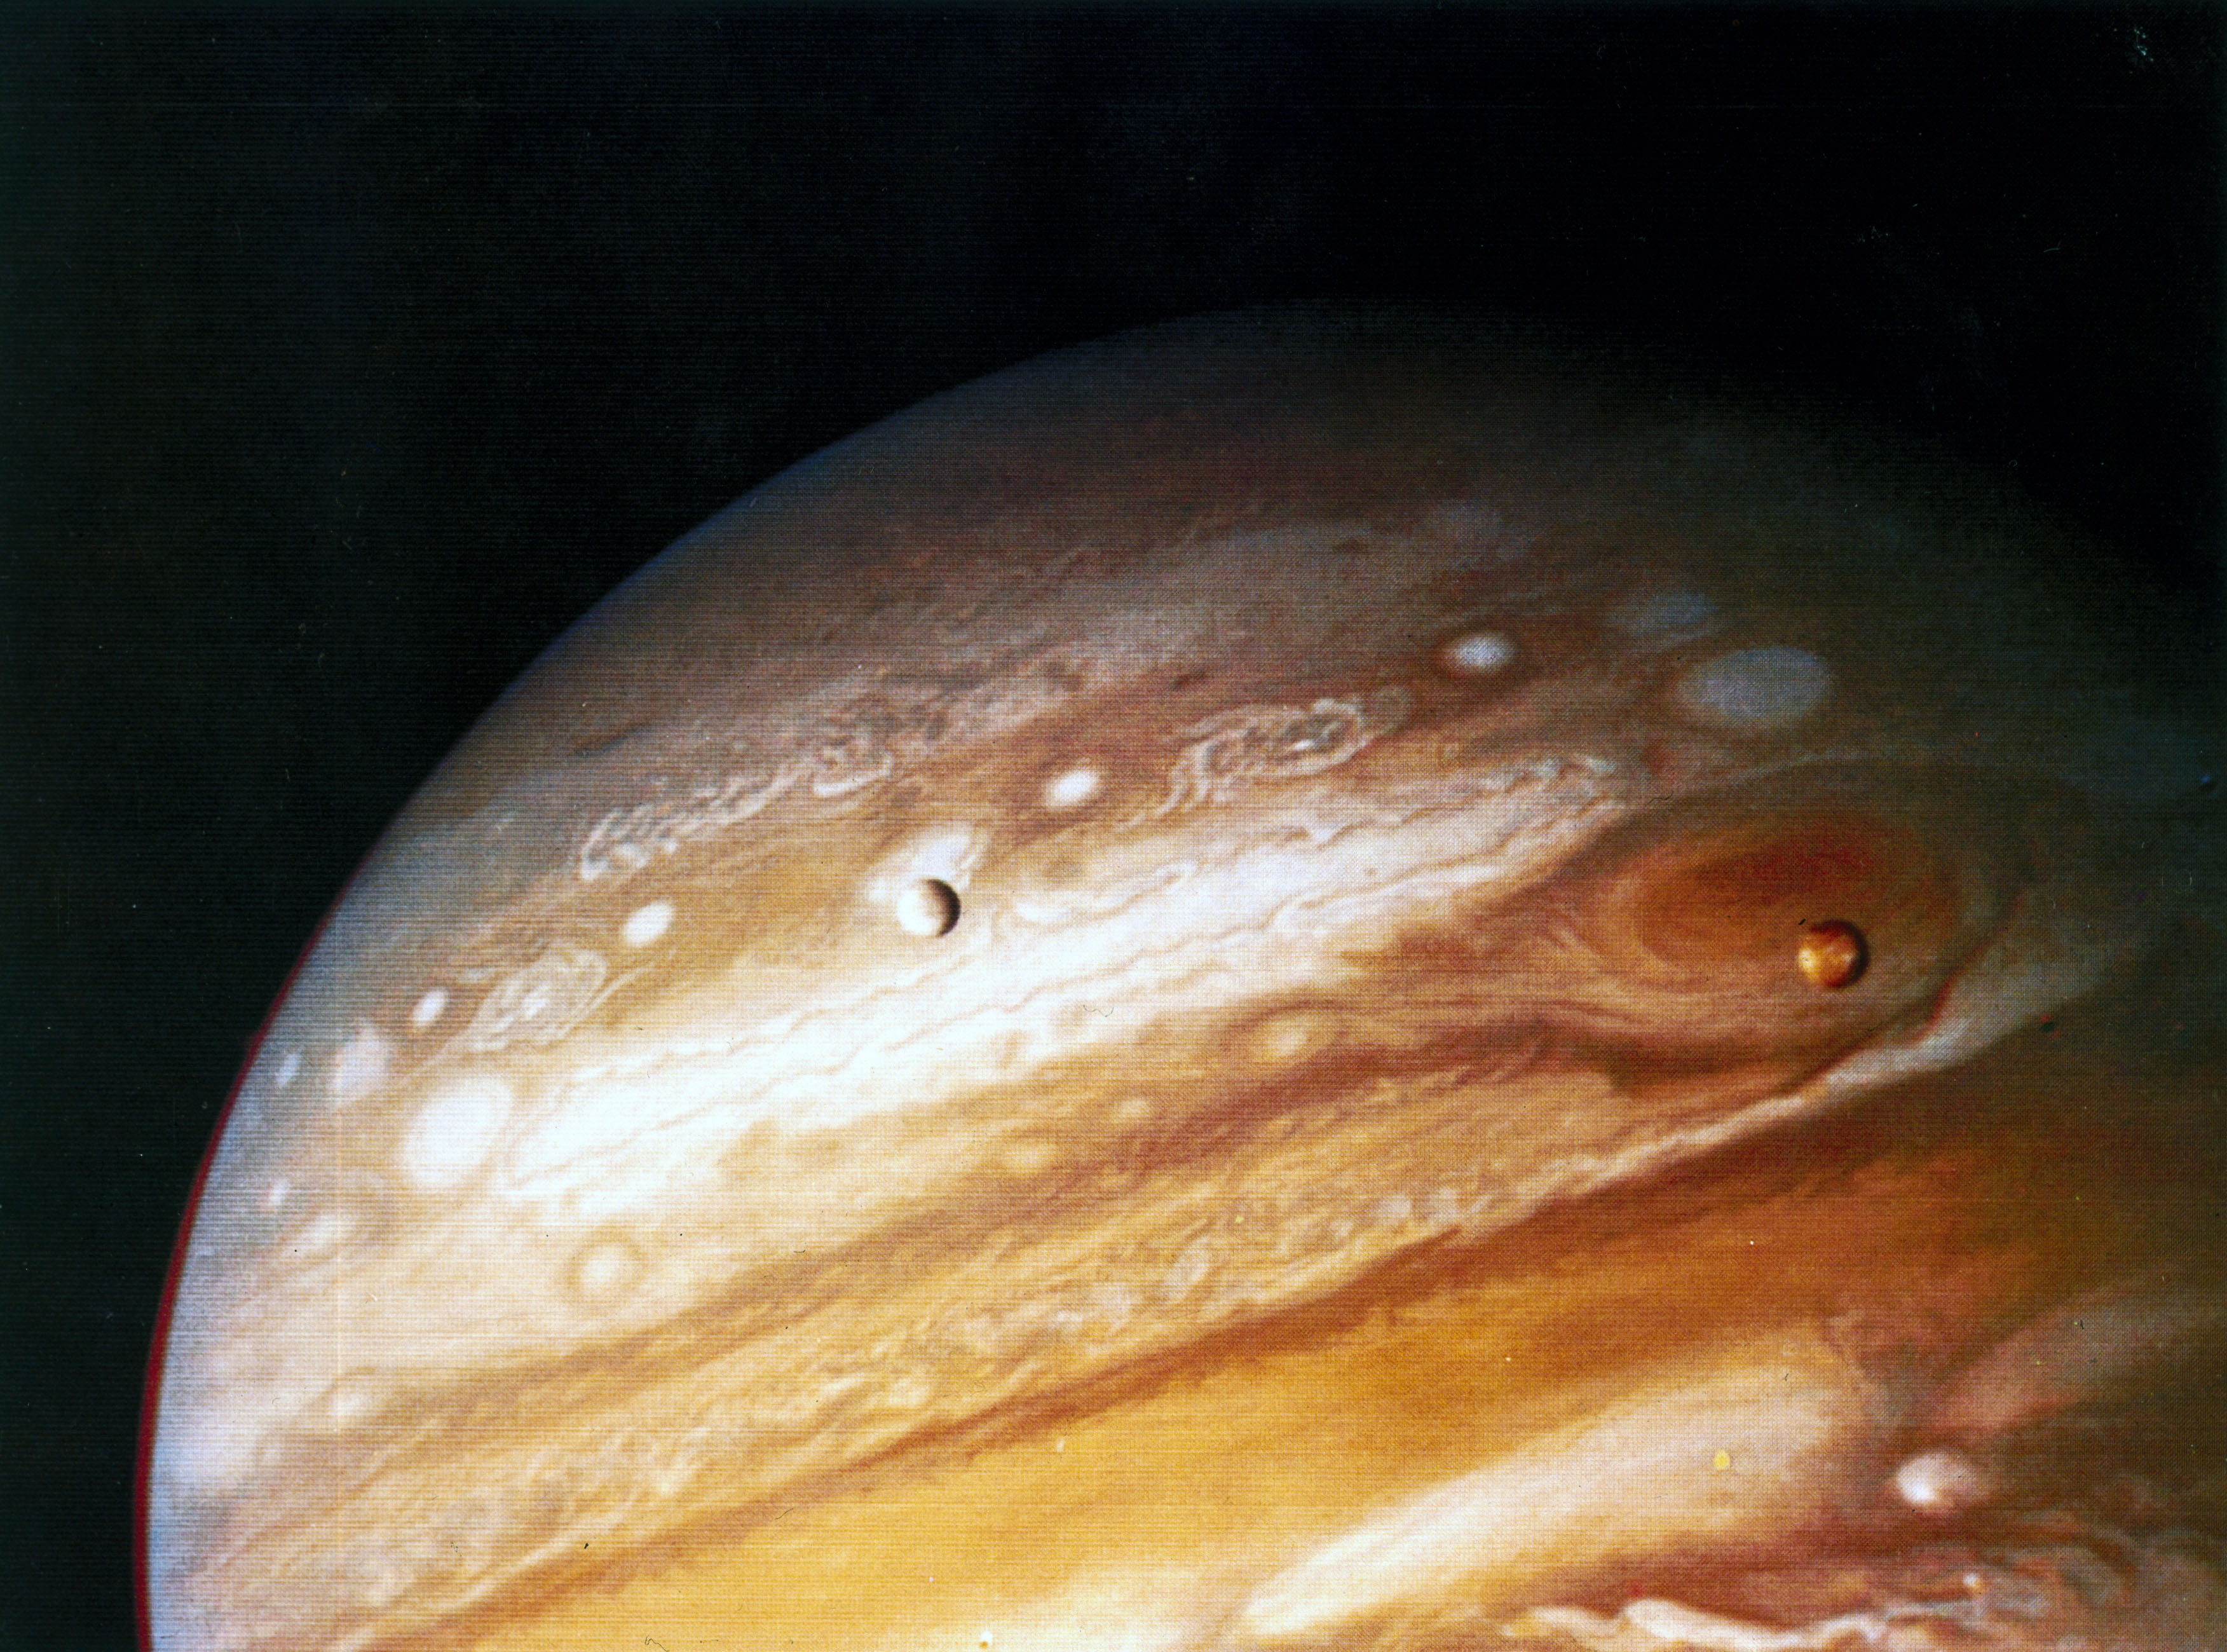 The planet Jupiter, showing two of its moons and the Great Red Spot, 1979.